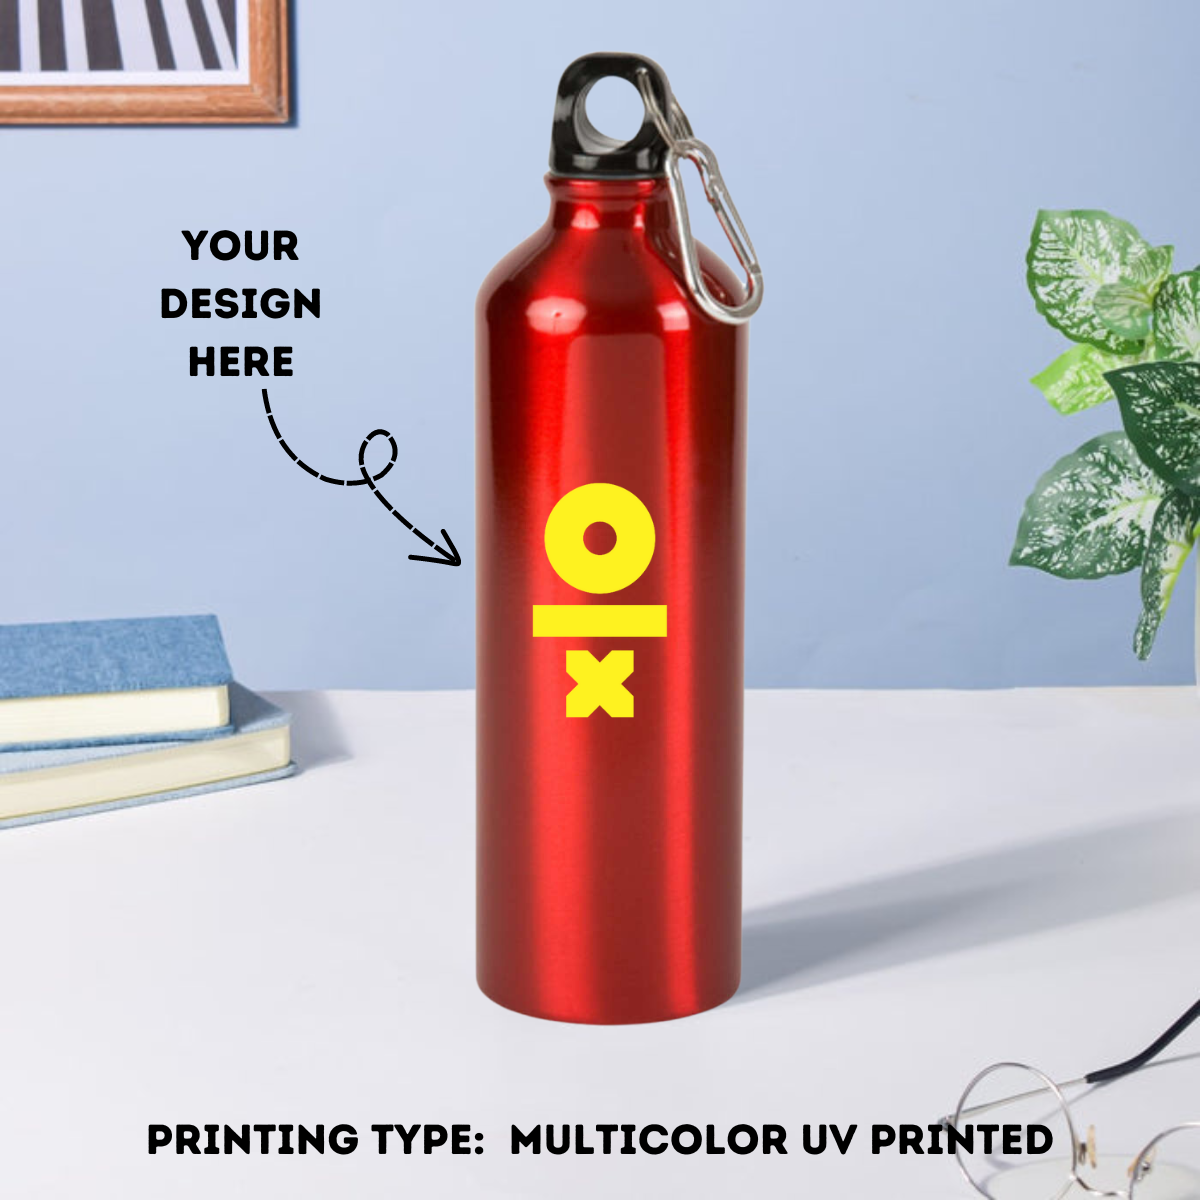 Personalized Red Aluminium Water Bottle Multicolor UV Printed - 750ml - For Return Gift, Corporate Gifting, Office or Personal Use